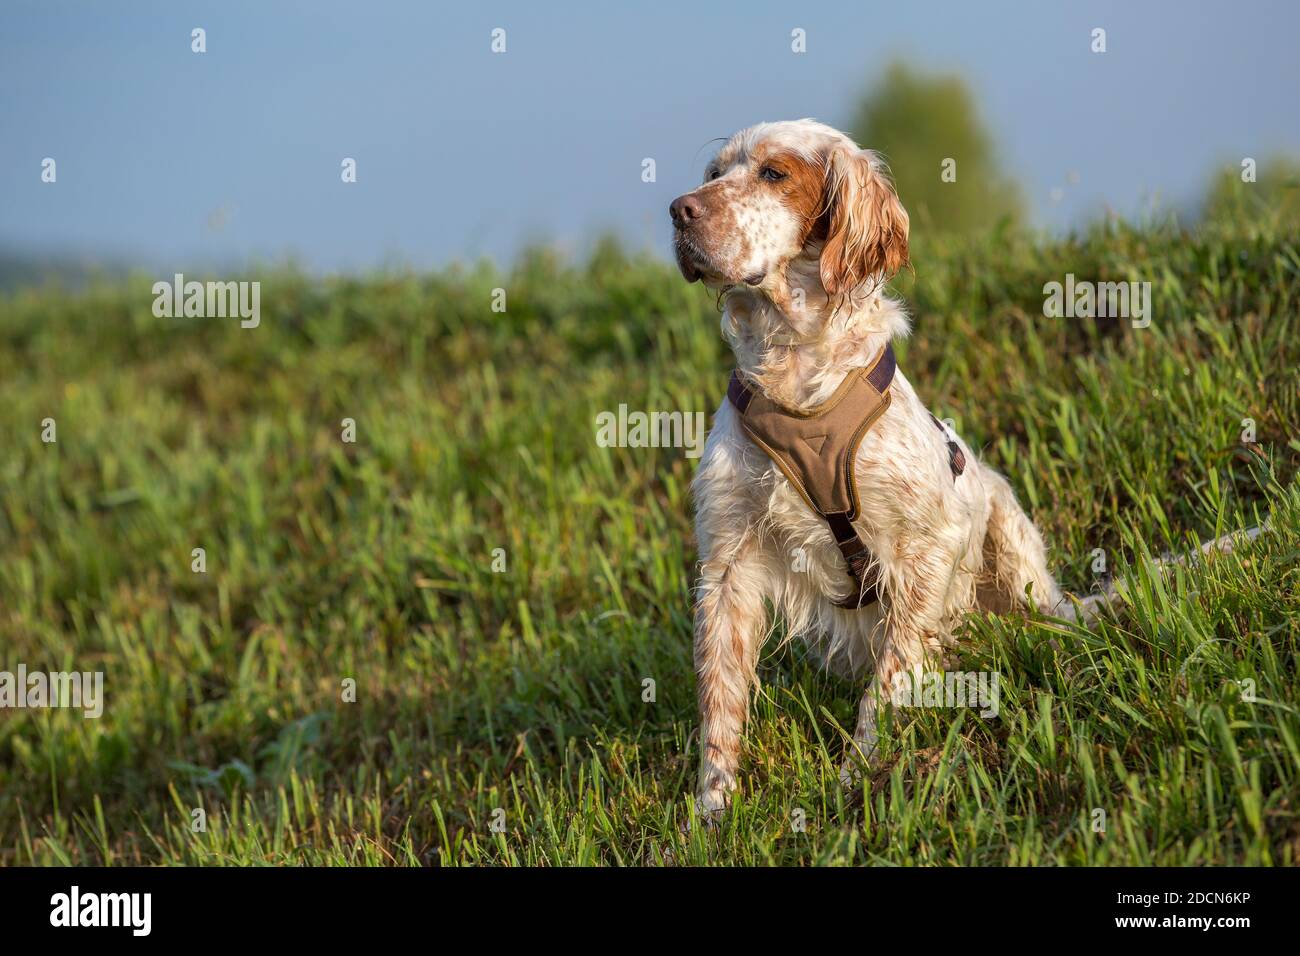 Orange Belton English Setter hunting dog wearing a brown harness sitting in the grass on a sunny day. Stock Photo